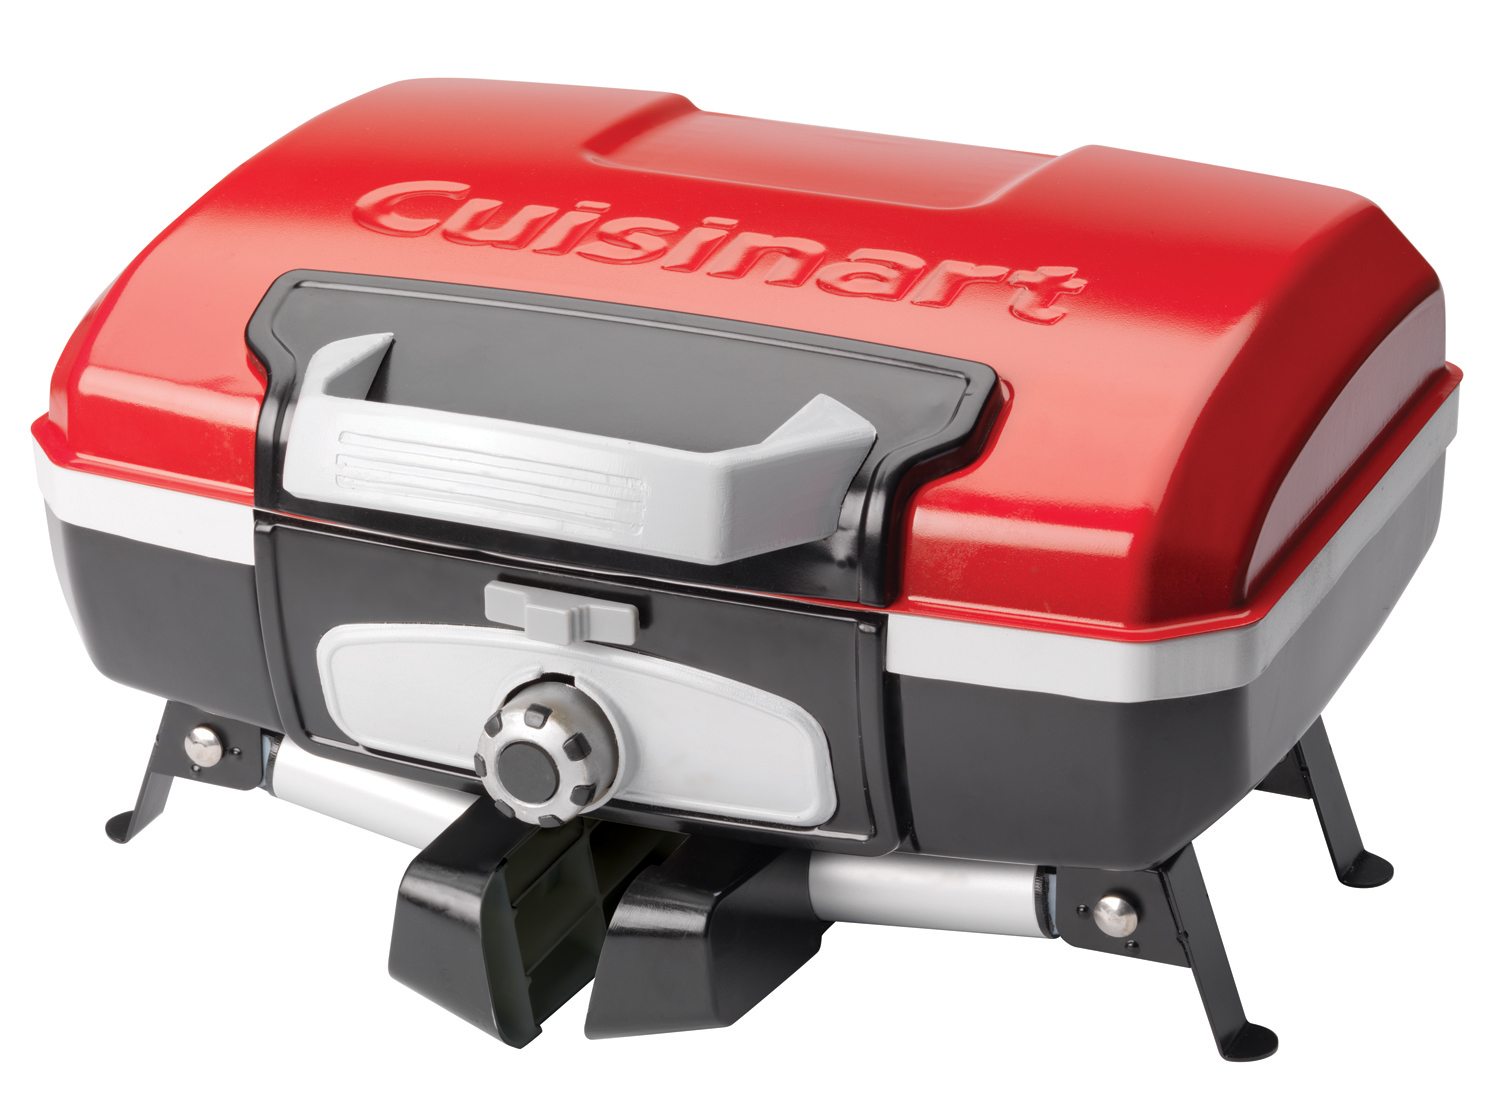 Cuisinart CGG-180T Petite Gourmet Portable Tabletop Outdoor Gas Grill, Red - image 3 of 9